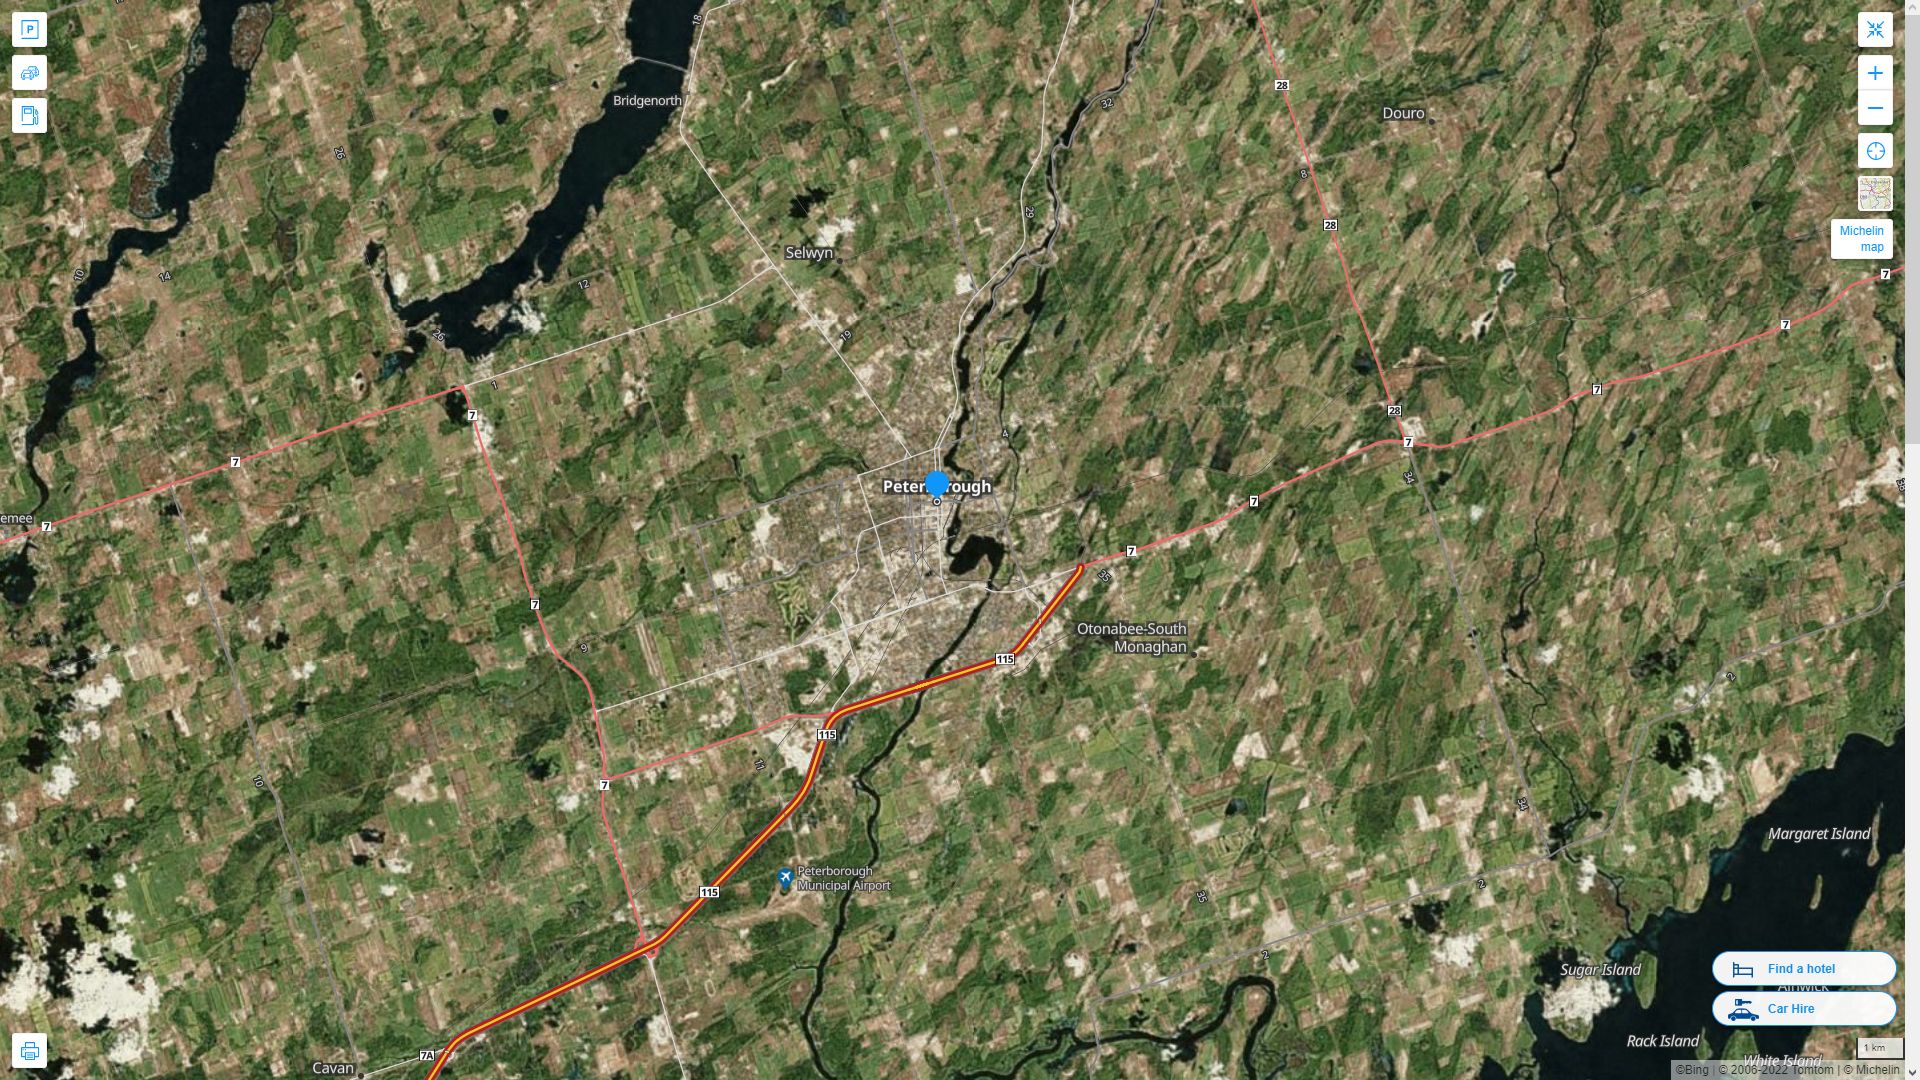 Peterborough Highway and Road Map with Satellite View